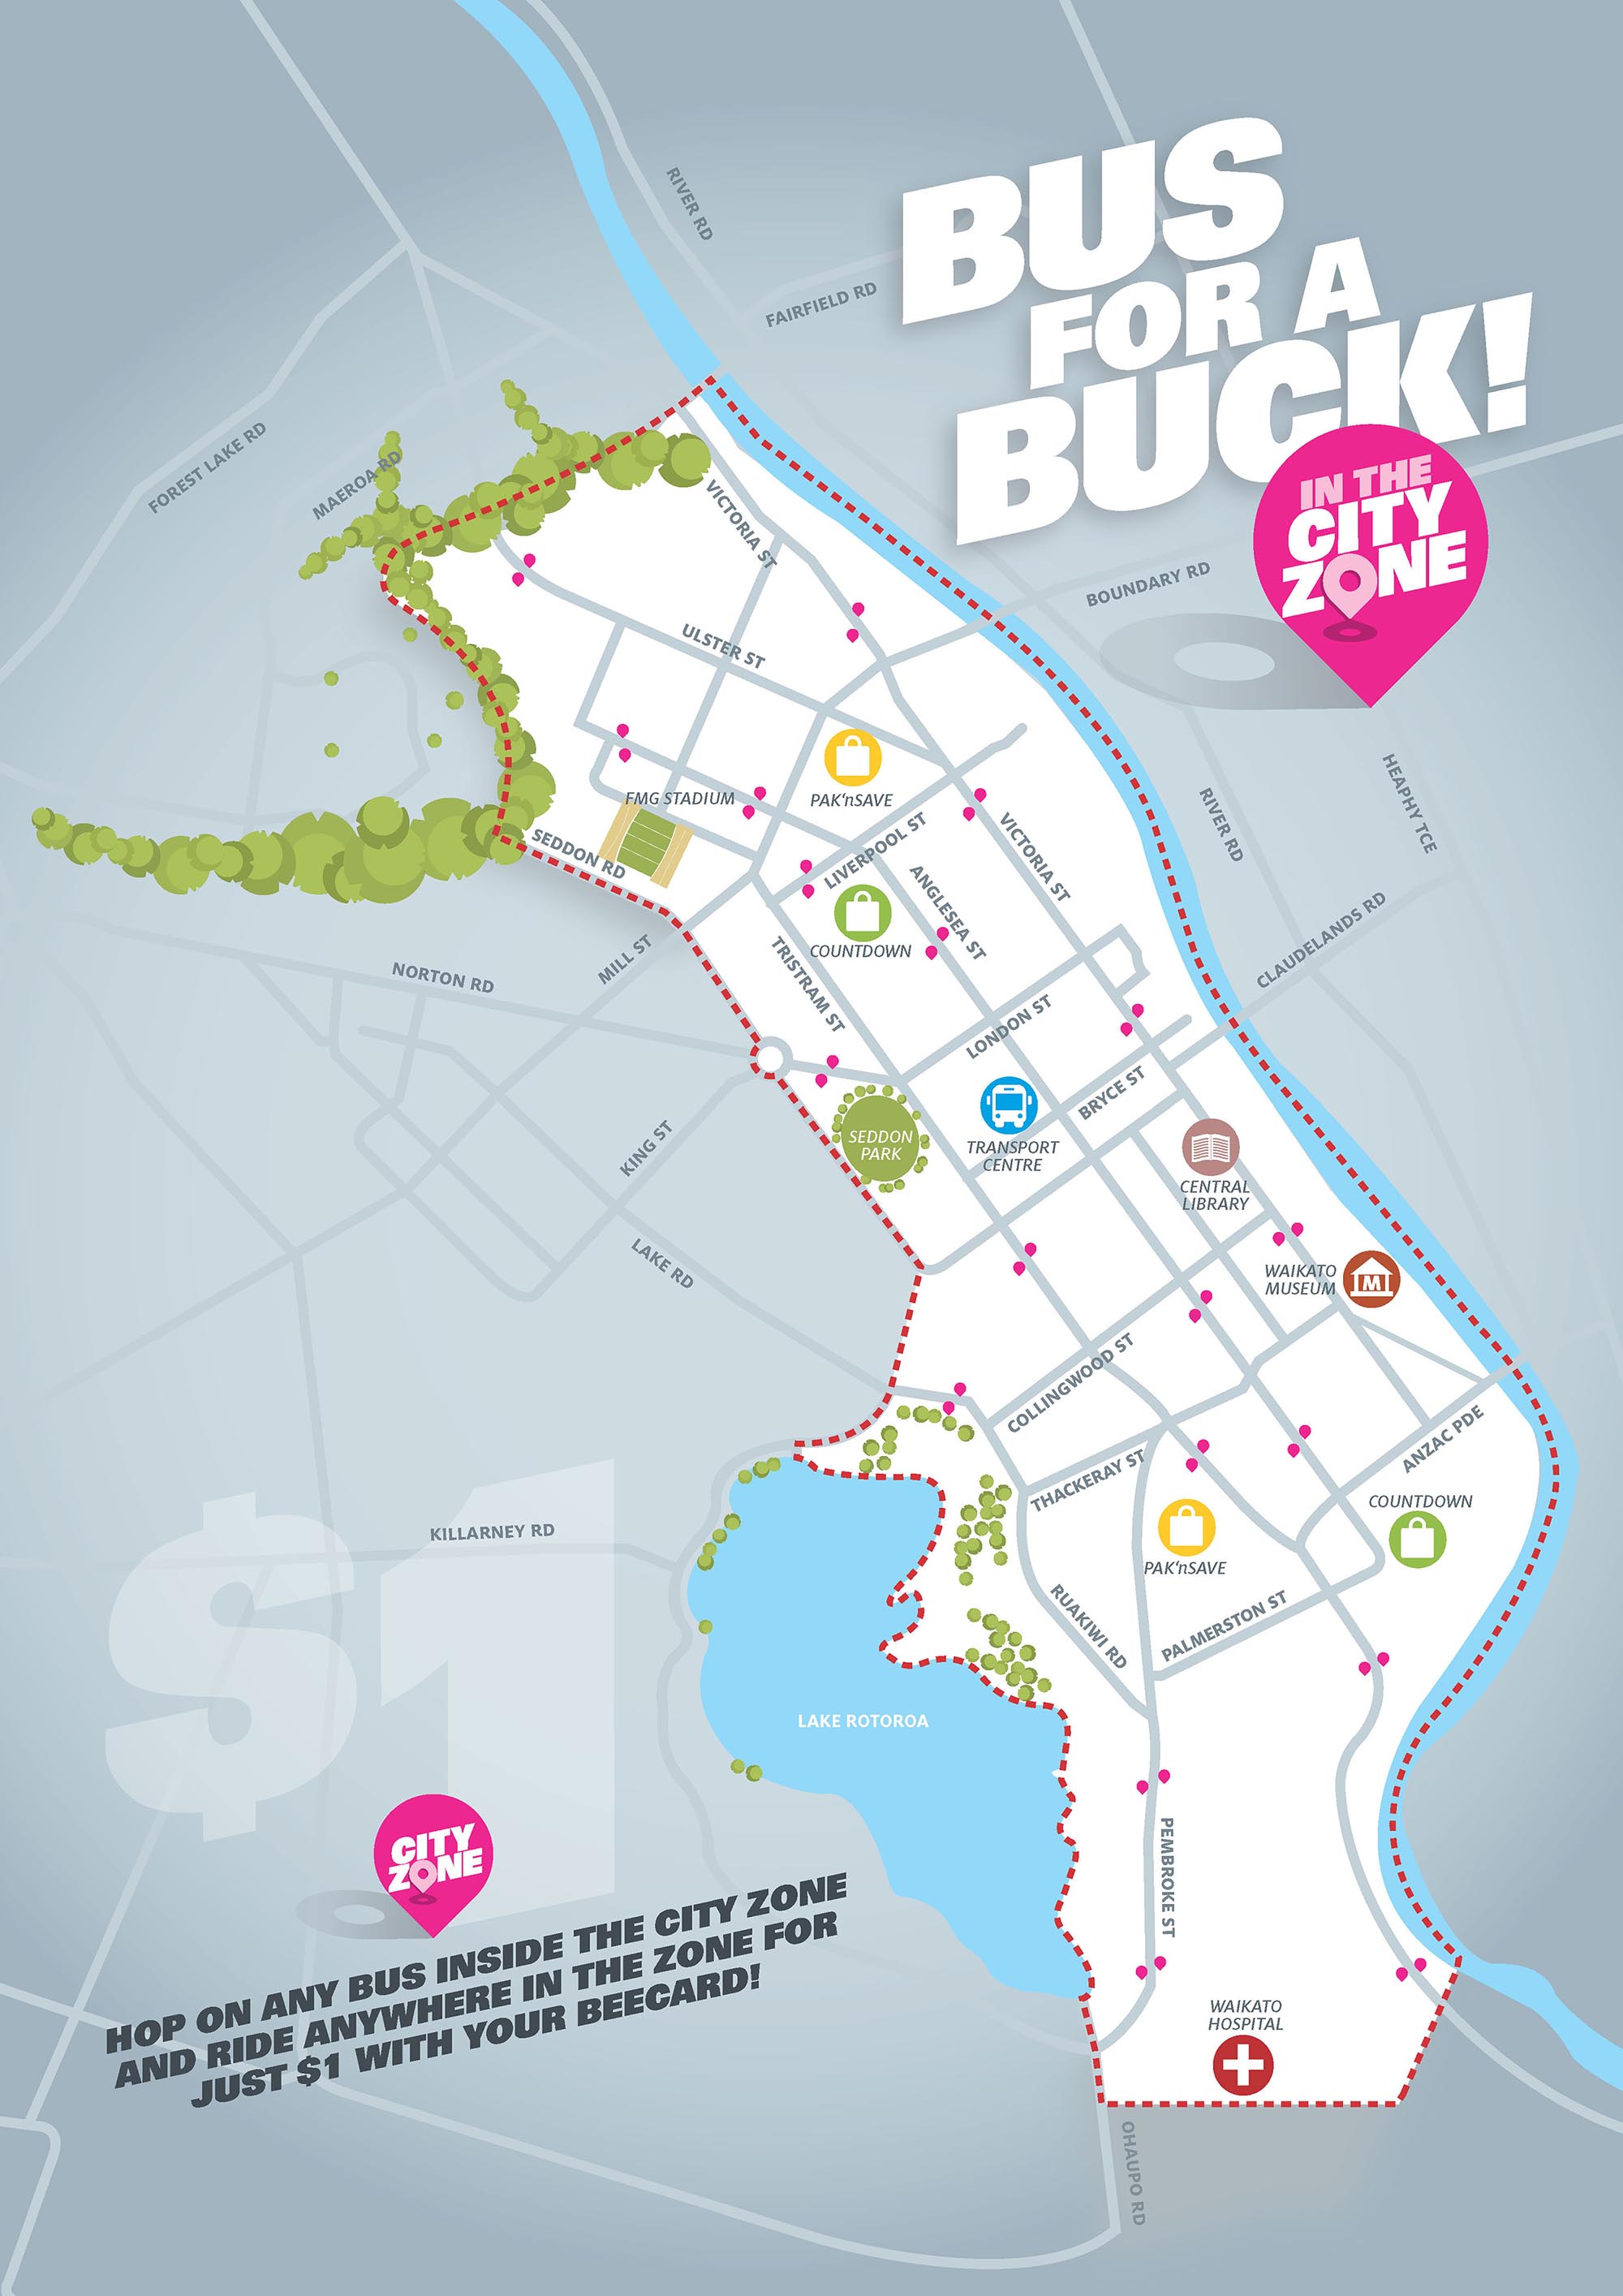 Bus for a buck in the central city zone - map showing outlines of the area